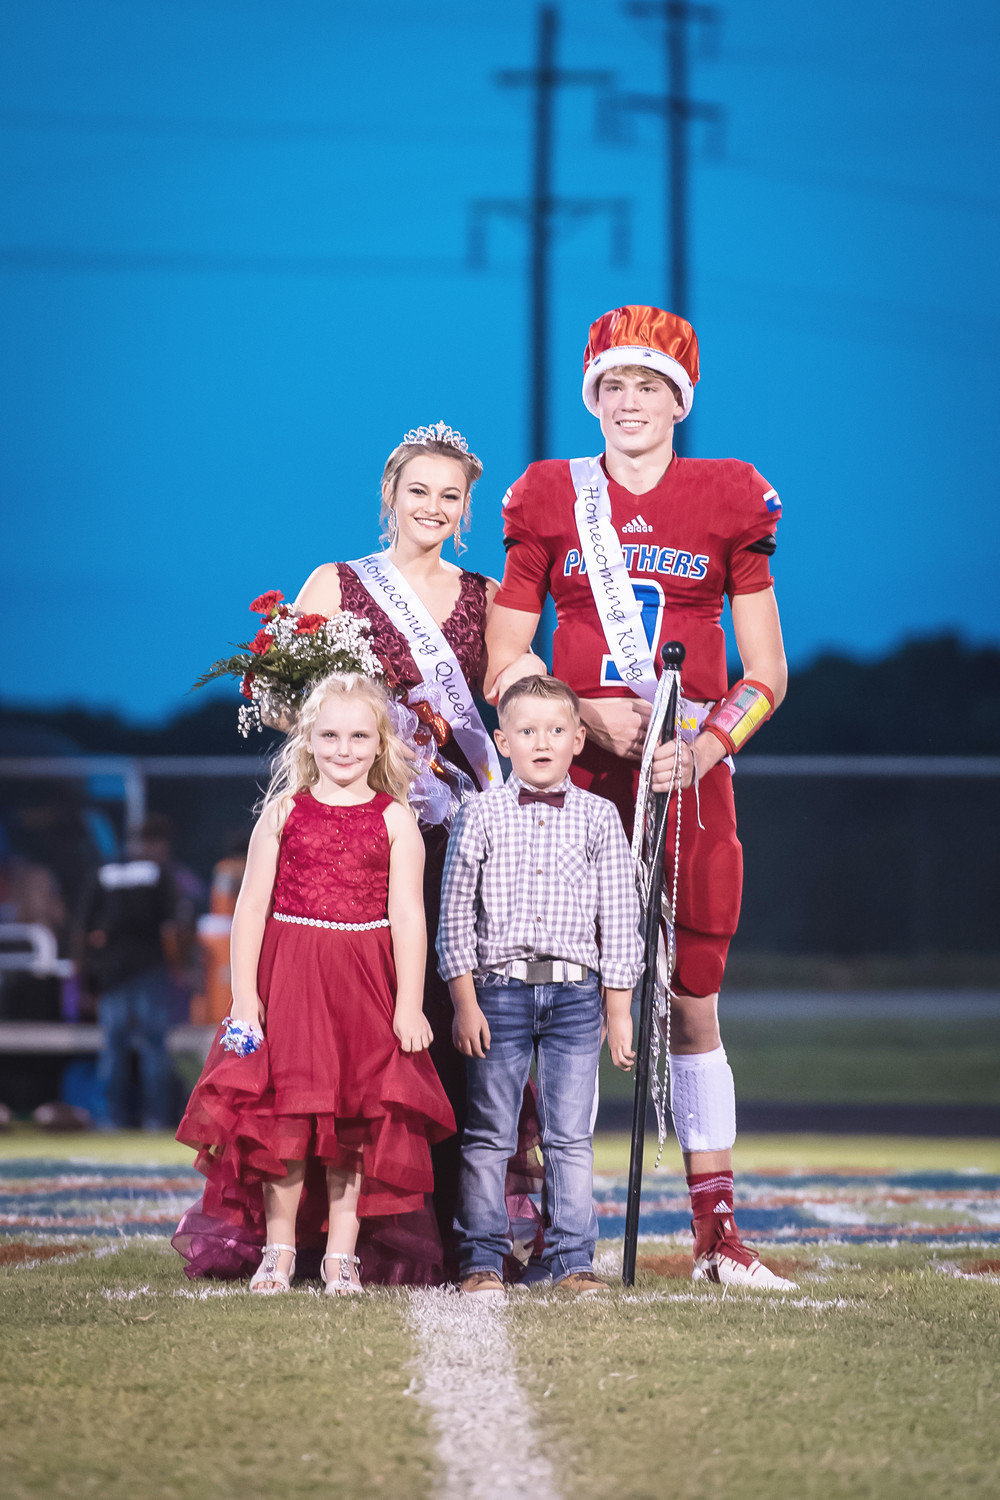 Alba-Golden named Macie Pendergrass as Homecoming Queen and Zane Smith King at Friday’s homecoming activities. Emma Bohannon and Hogan Webster served as flower girl and crown-bearer.